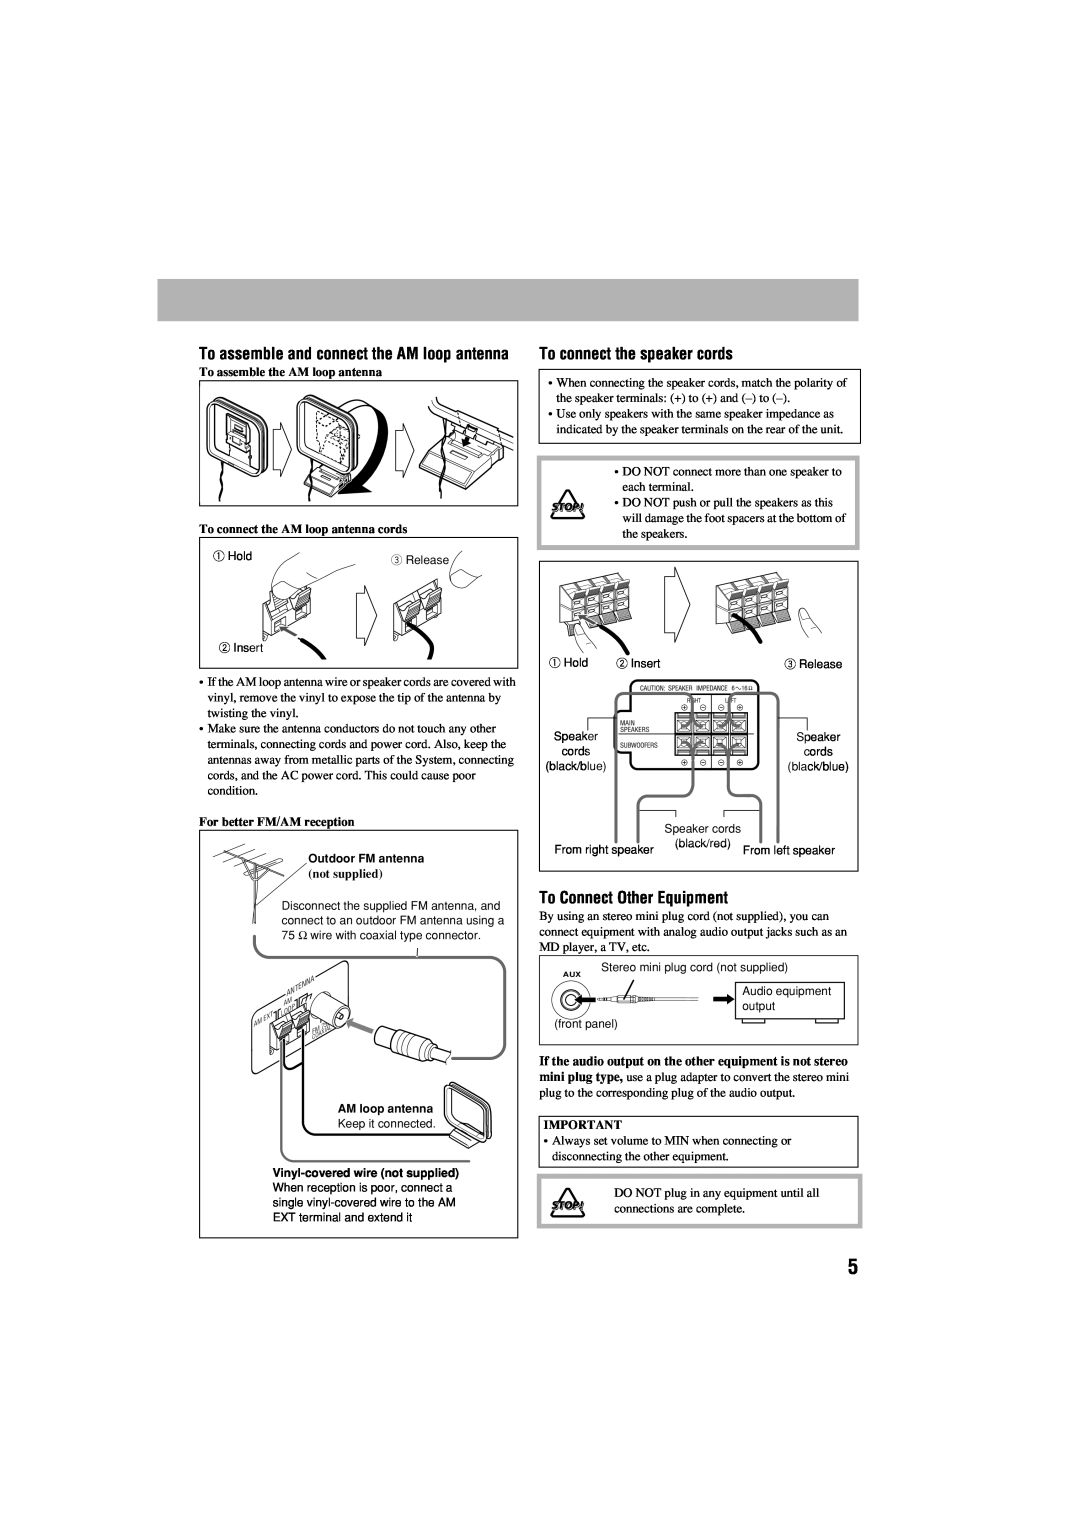 JVC HX-GX7 manual To connect the speaker cords, To Connect Other Equipment, To assemble and connect the AM loop antenna 